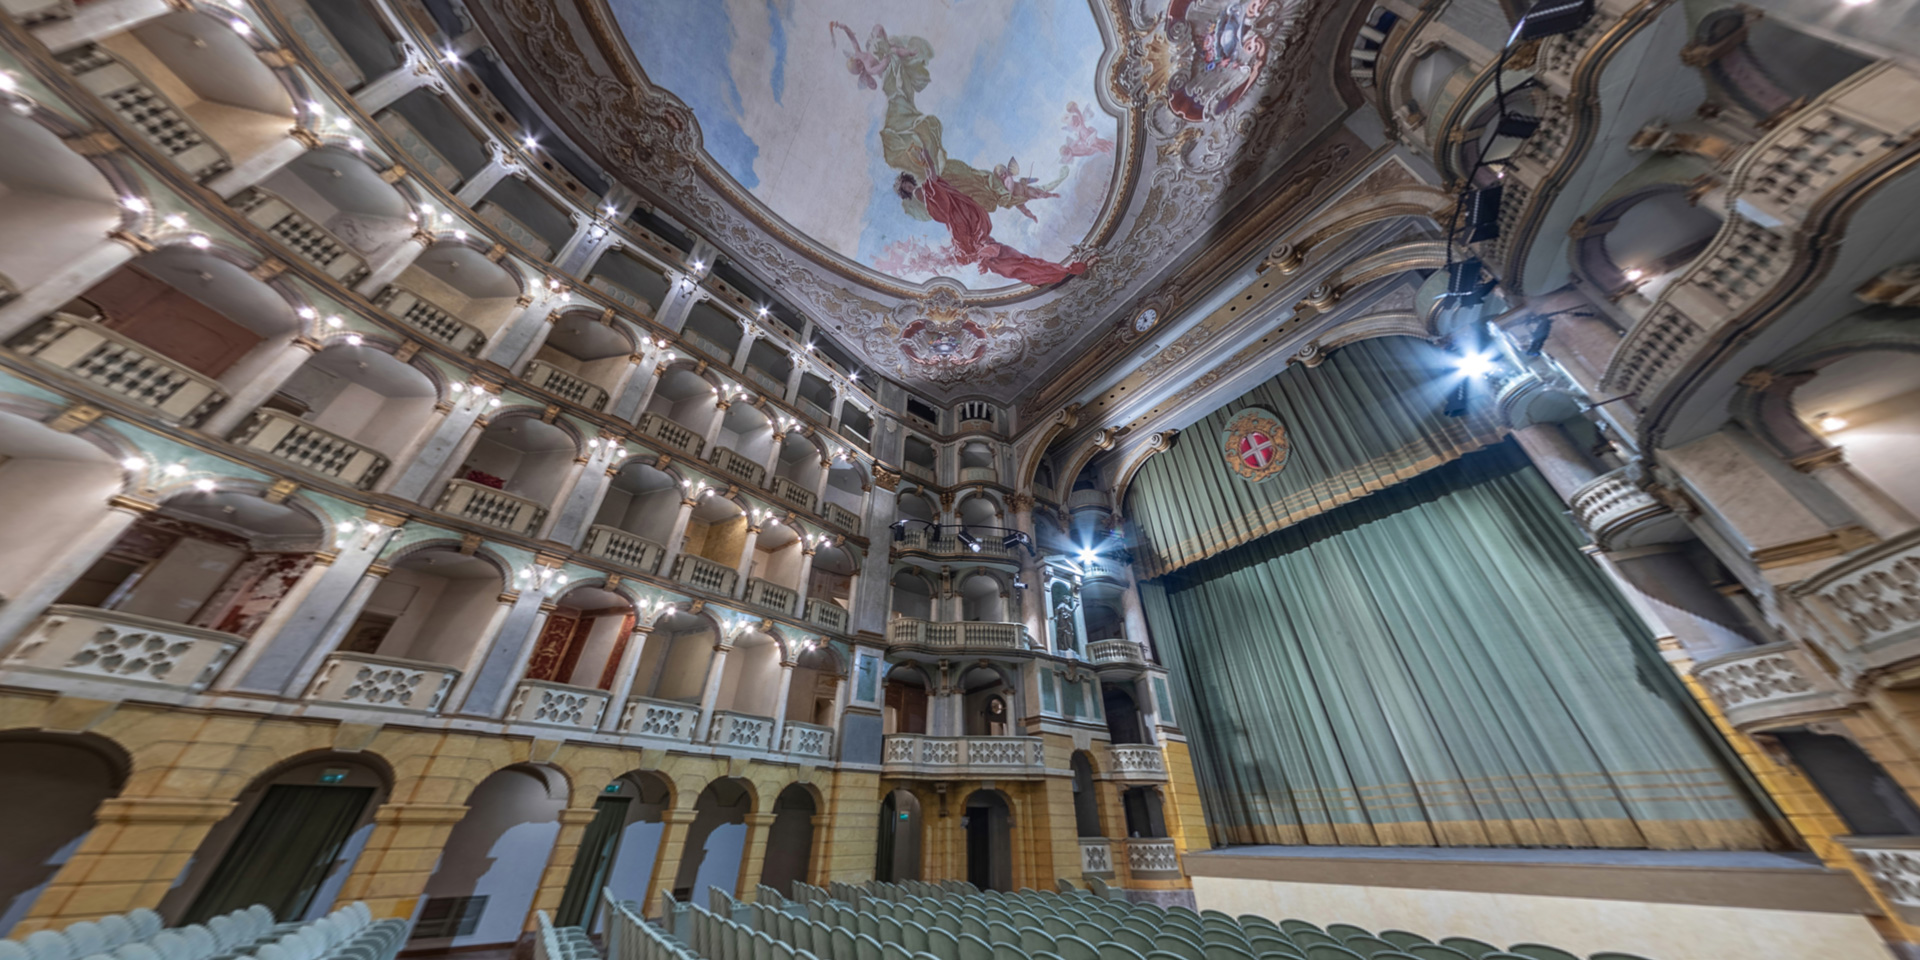 Fraschini Theater is the citys opera house in Pavia